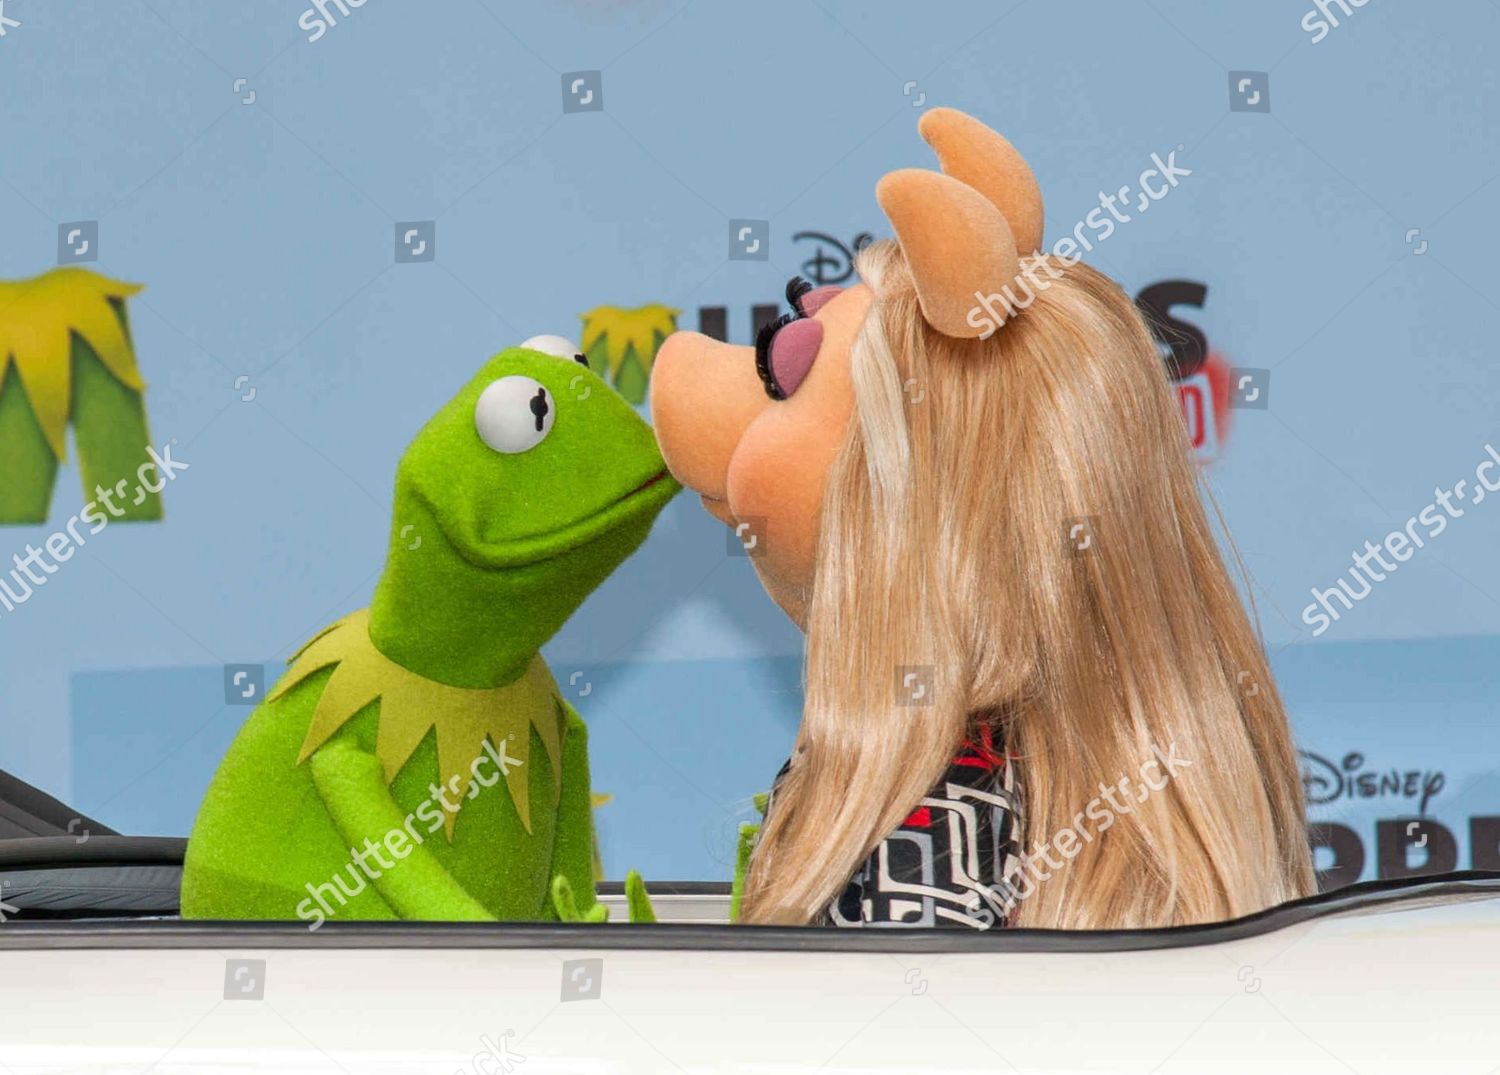 kermit and miss piggy kissing